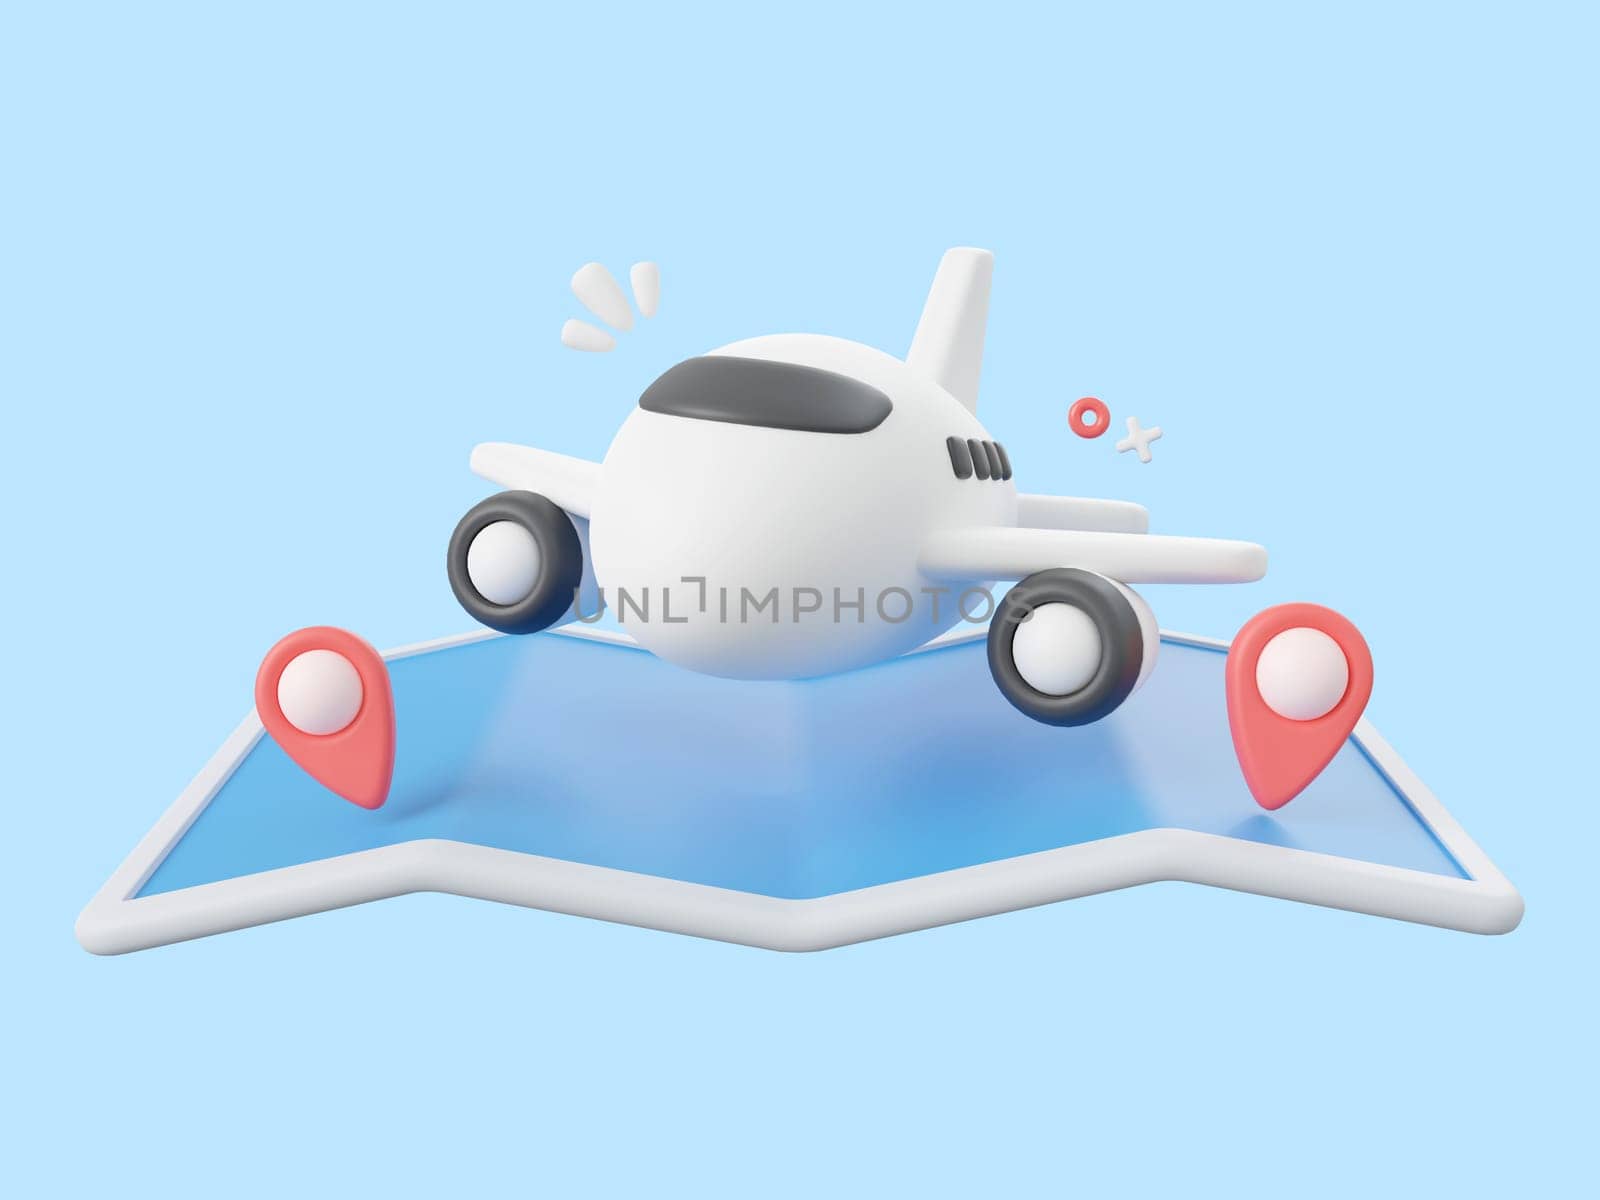 3d cartoon design illustration of Airplane with pins on map.